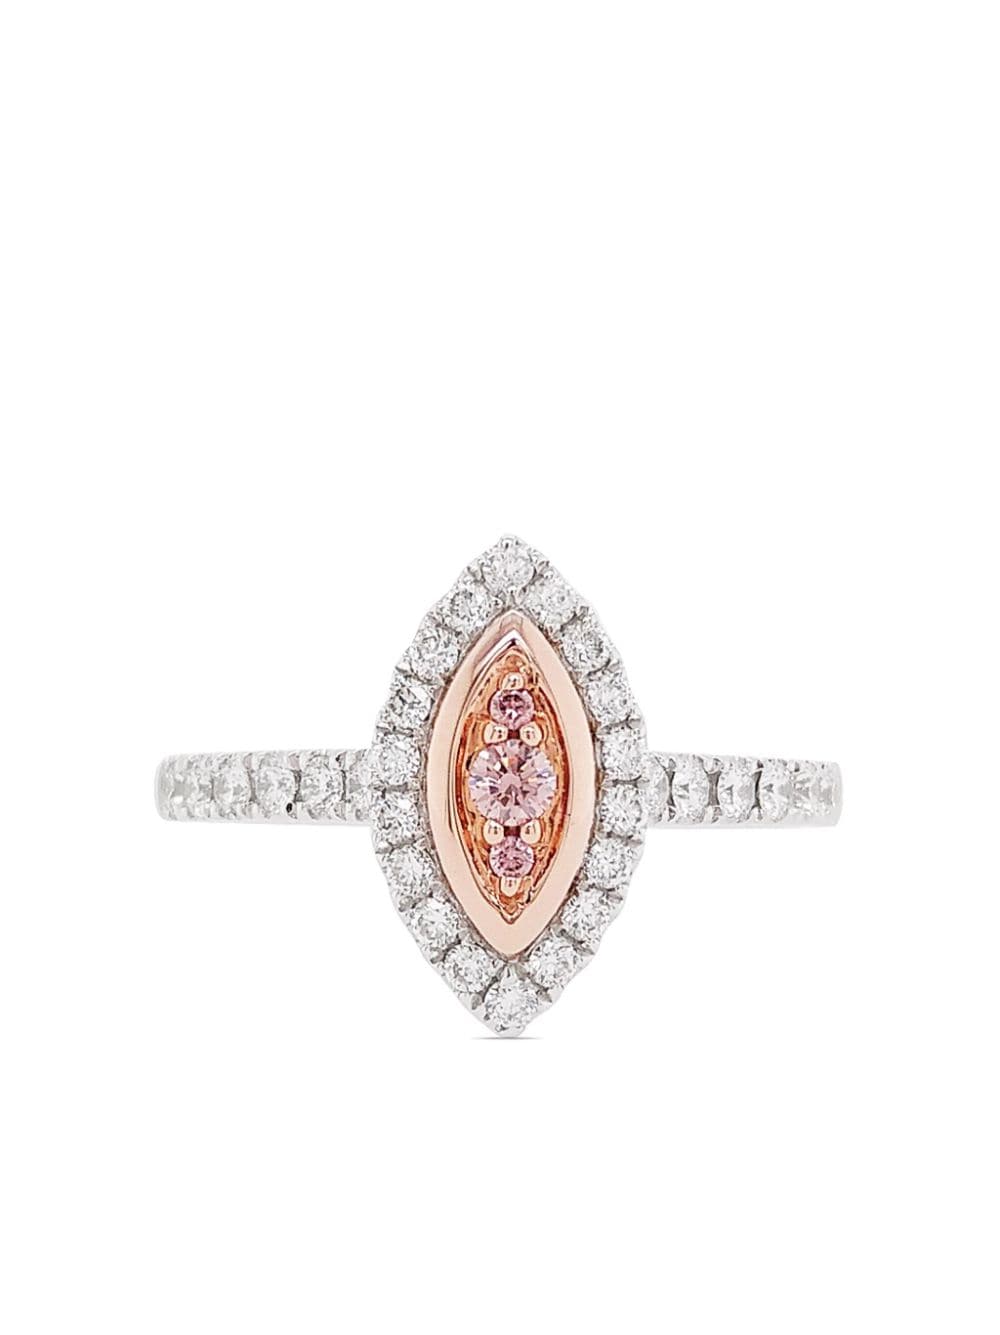 Hyt Jewelry Rose Gold And Platinum Diamond Ring In White